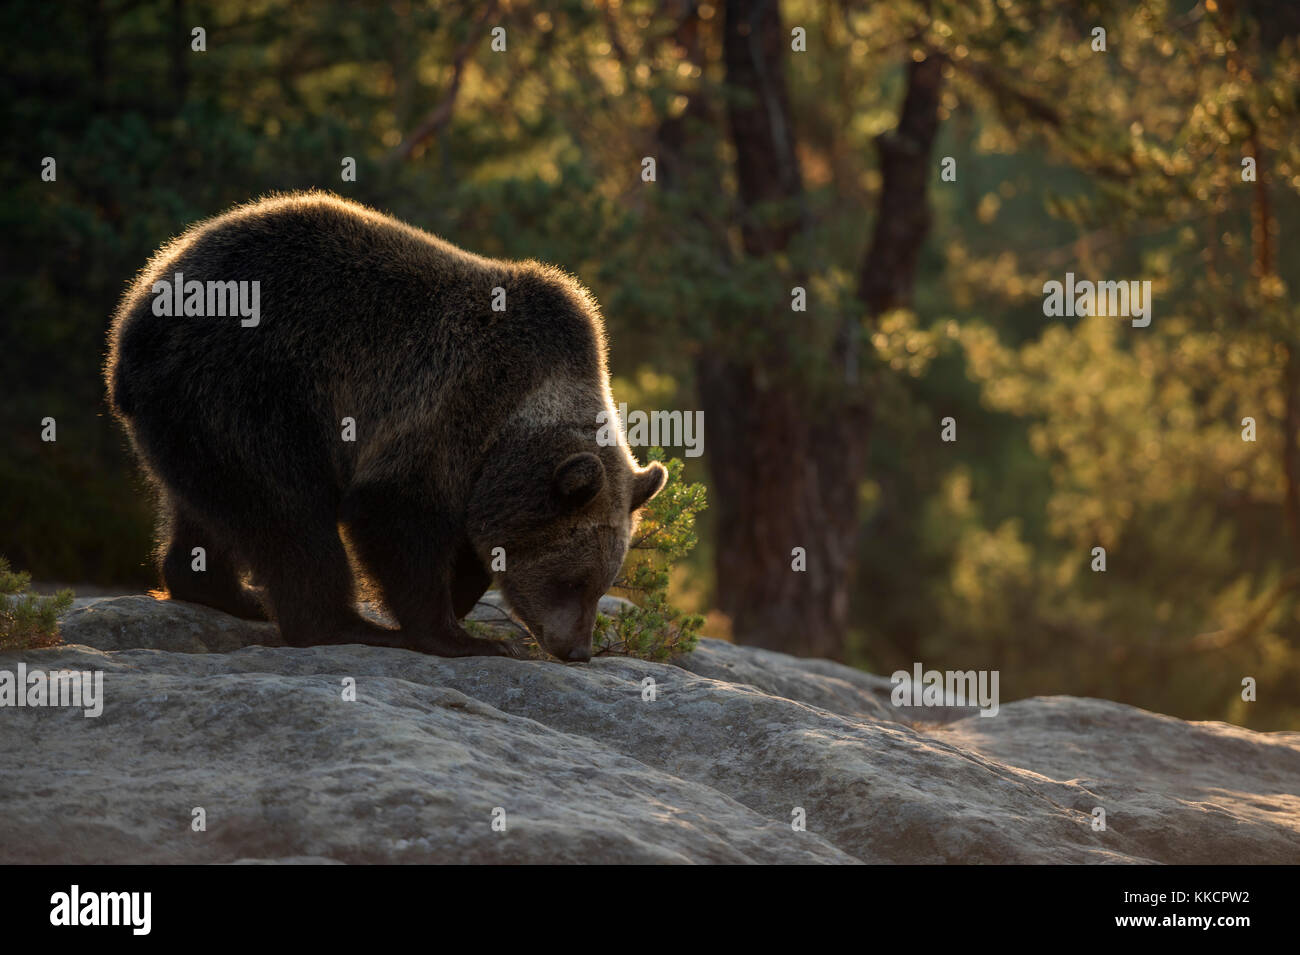 Brown Bear ( Ursus arctos ), young cub, standing on rocks on a clearing in a boreal forest, sniffing at the hround, warm morning light, Europe. Stock Photo